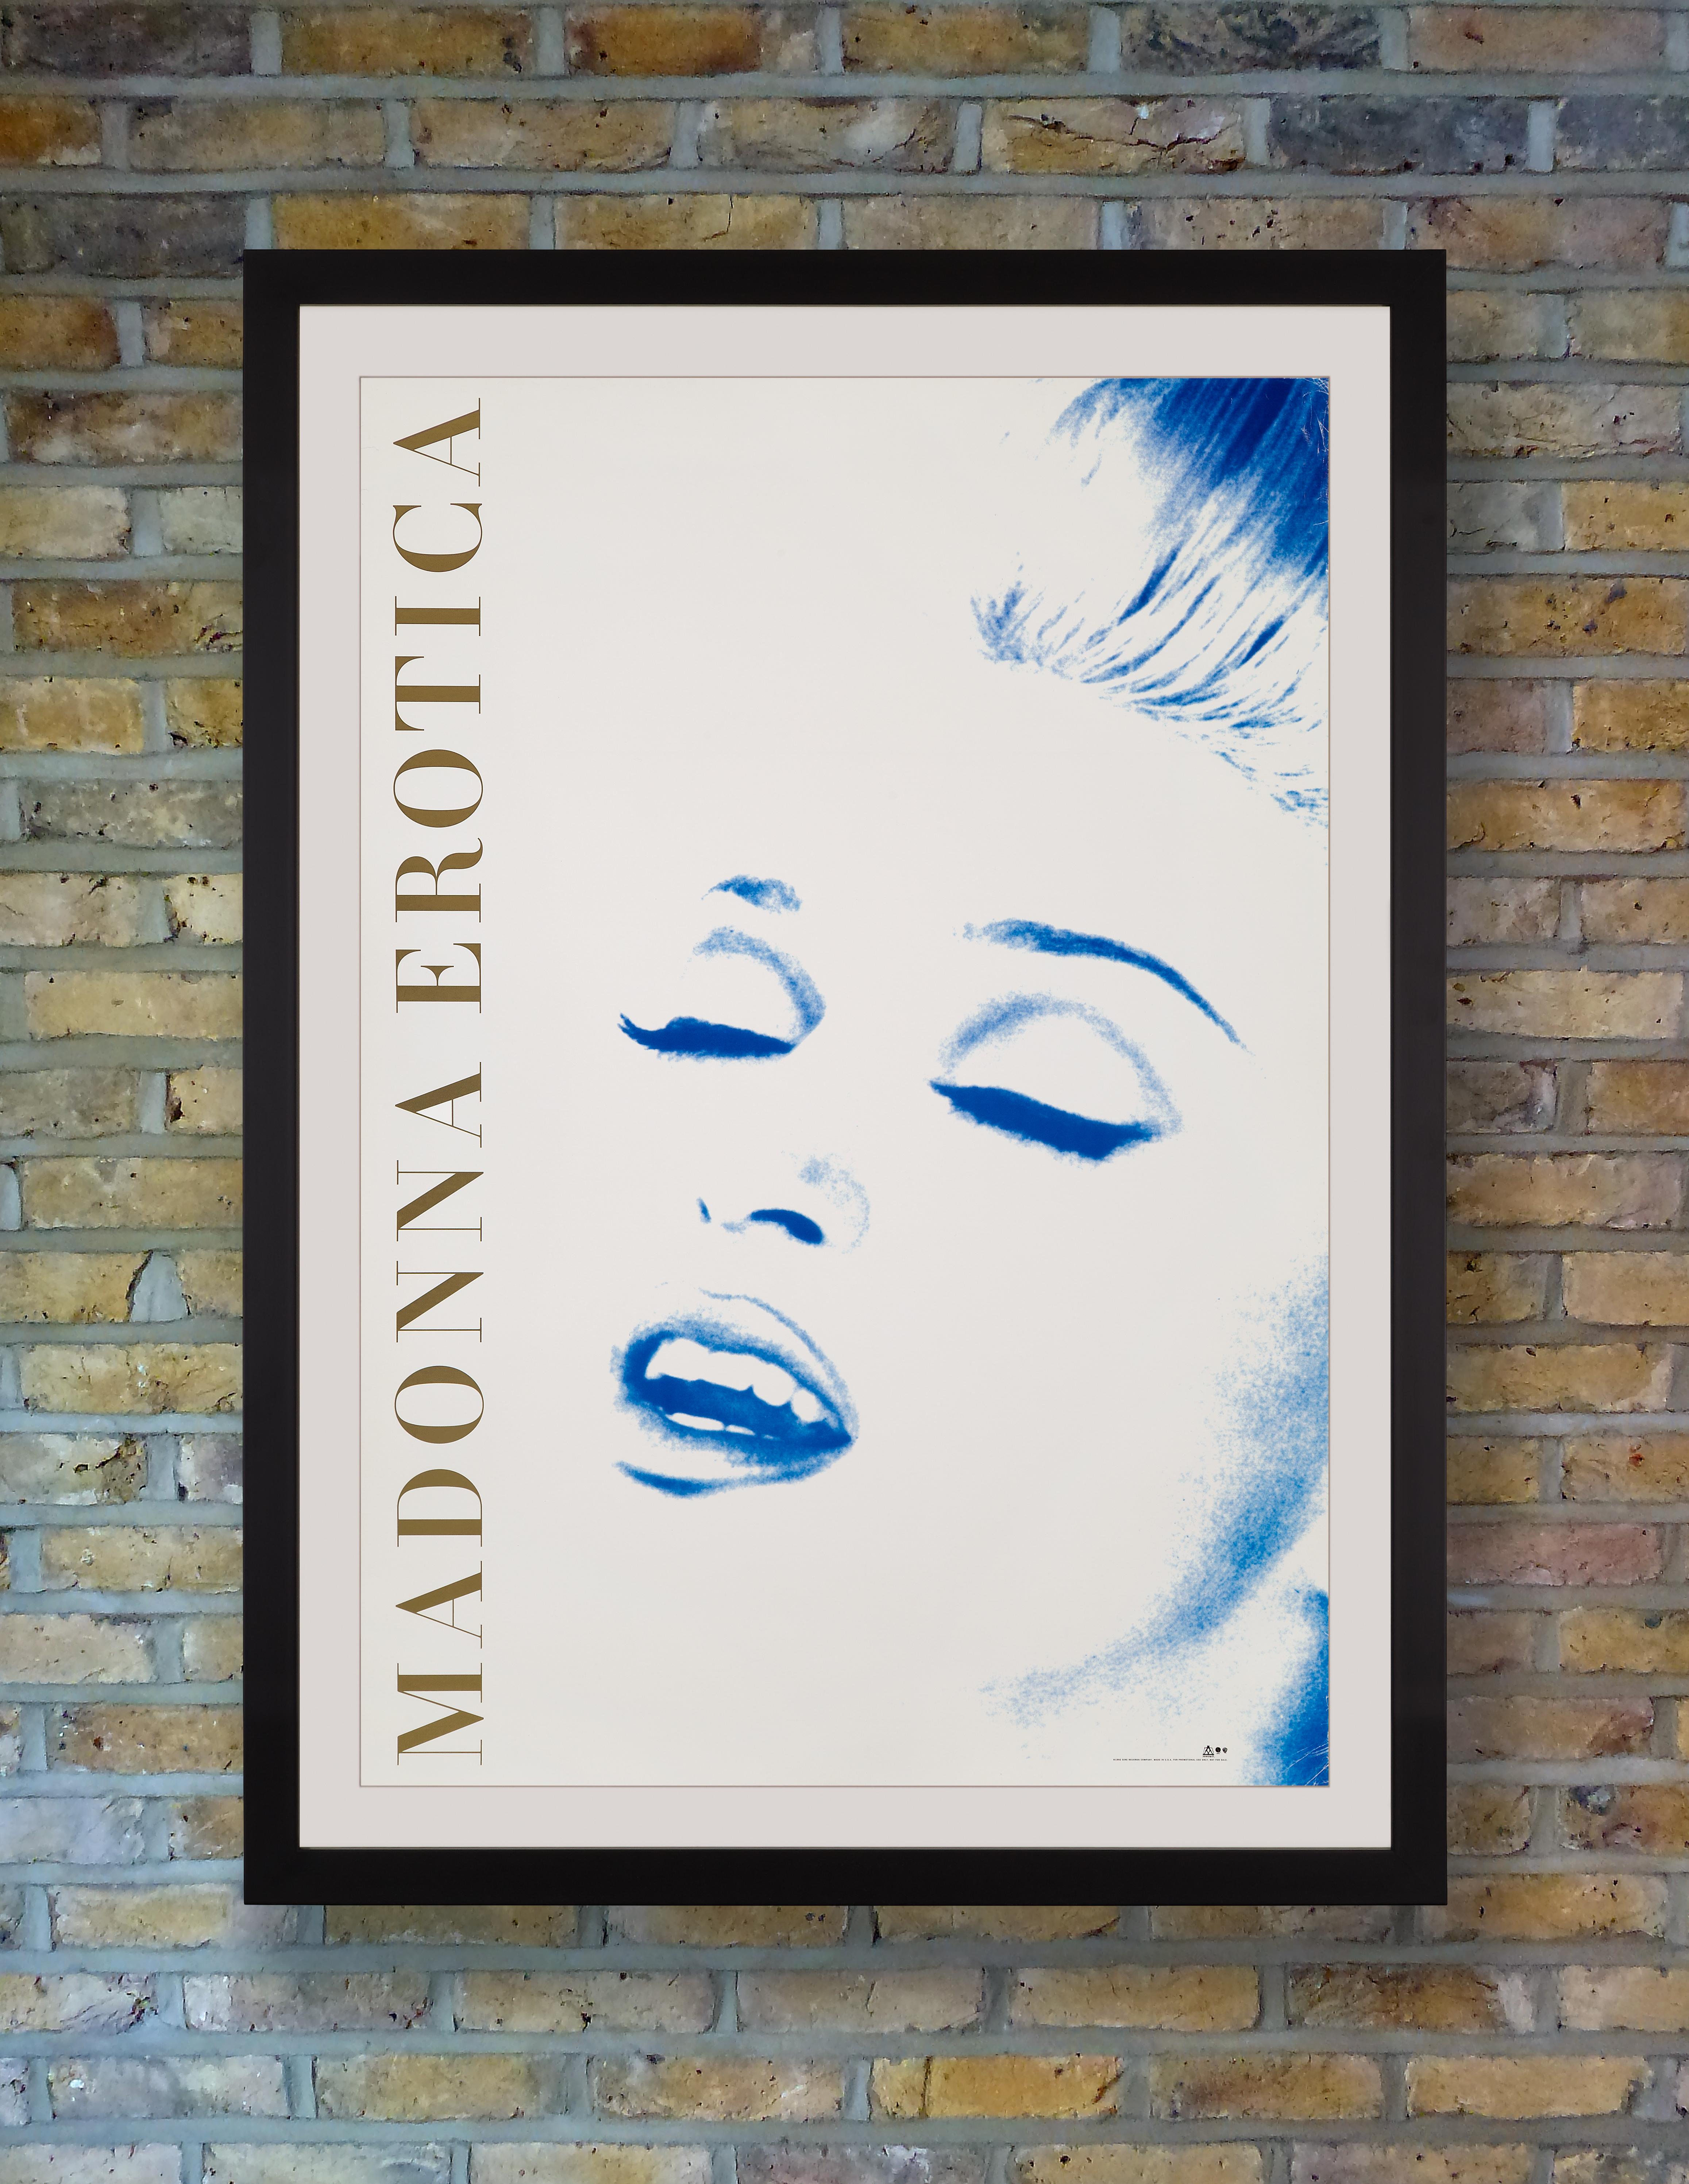 A Sire Records promotional poster for the October 1992 release of Madonna's fifth studio album 'Erotica,' a concept album about sex and romance, incorporating her alter ego Mistress Dita, inspired by actress Dita Parlo. The poster features the same